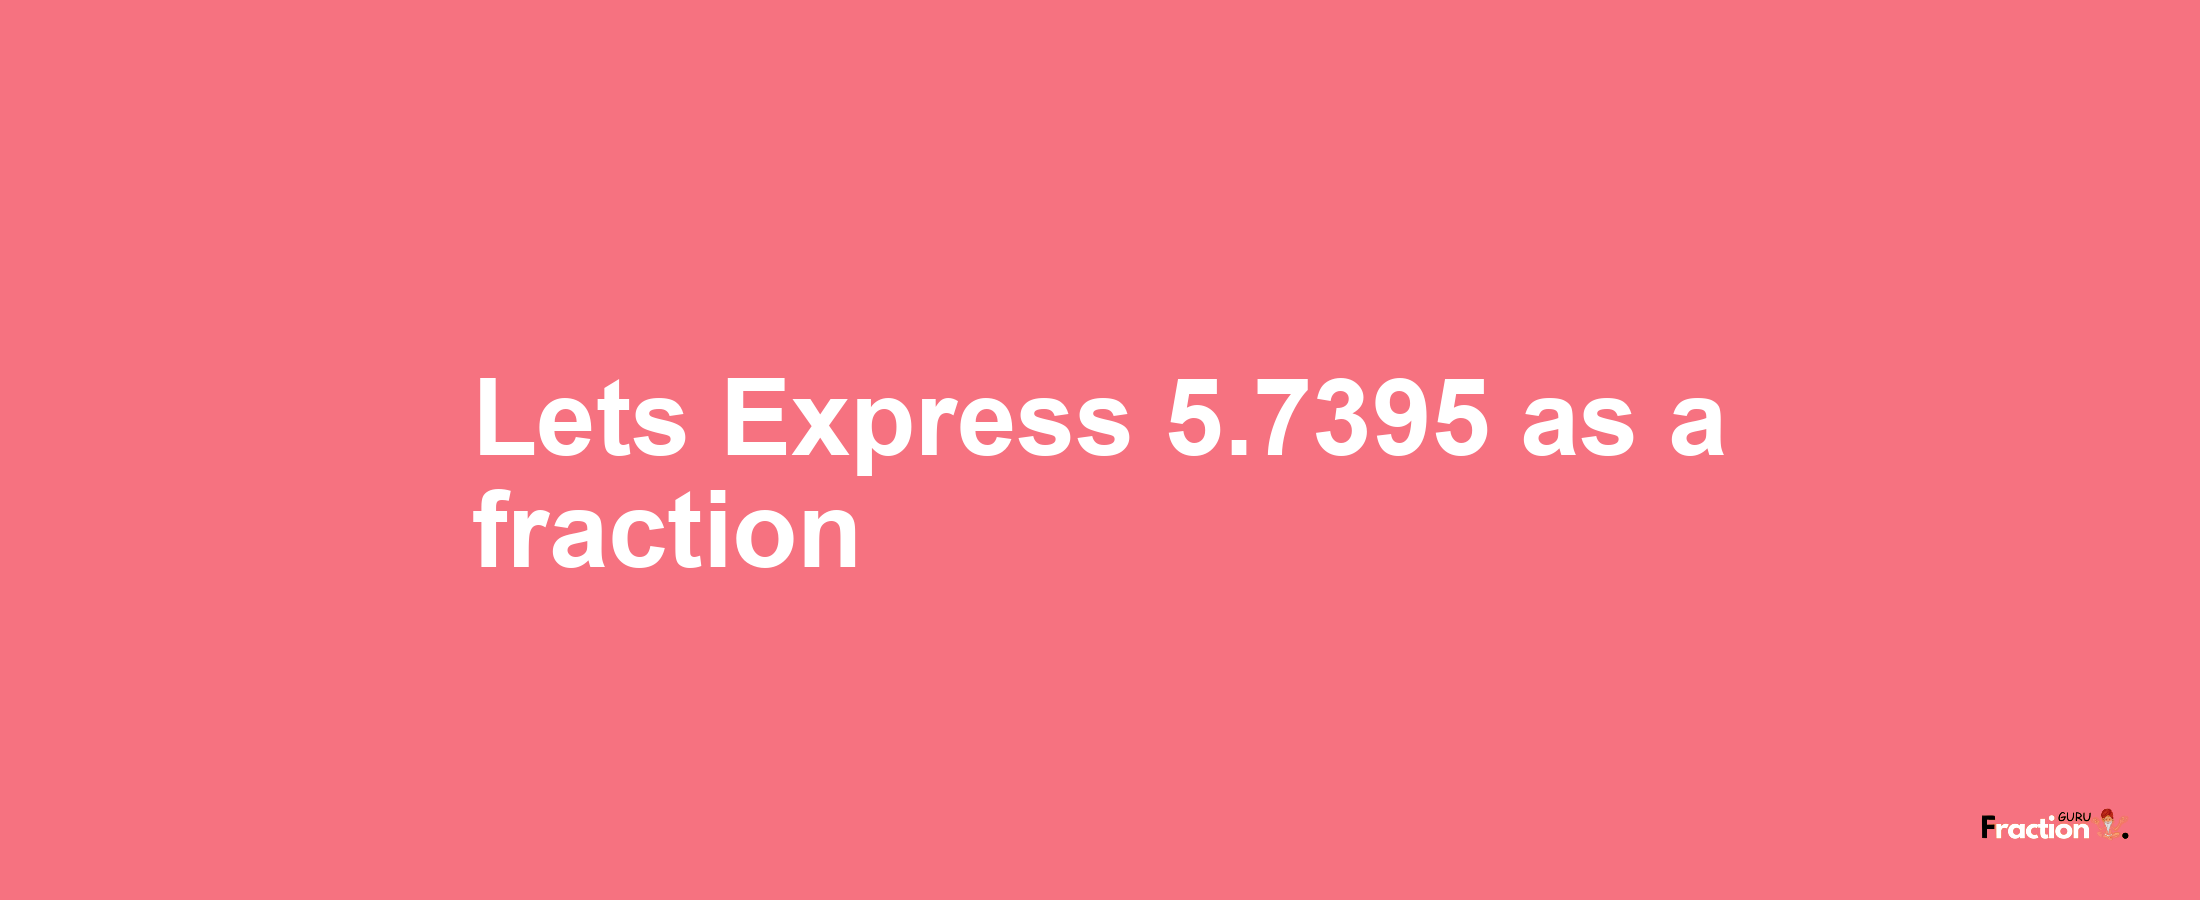 Lets Express 5.7395 as afraction